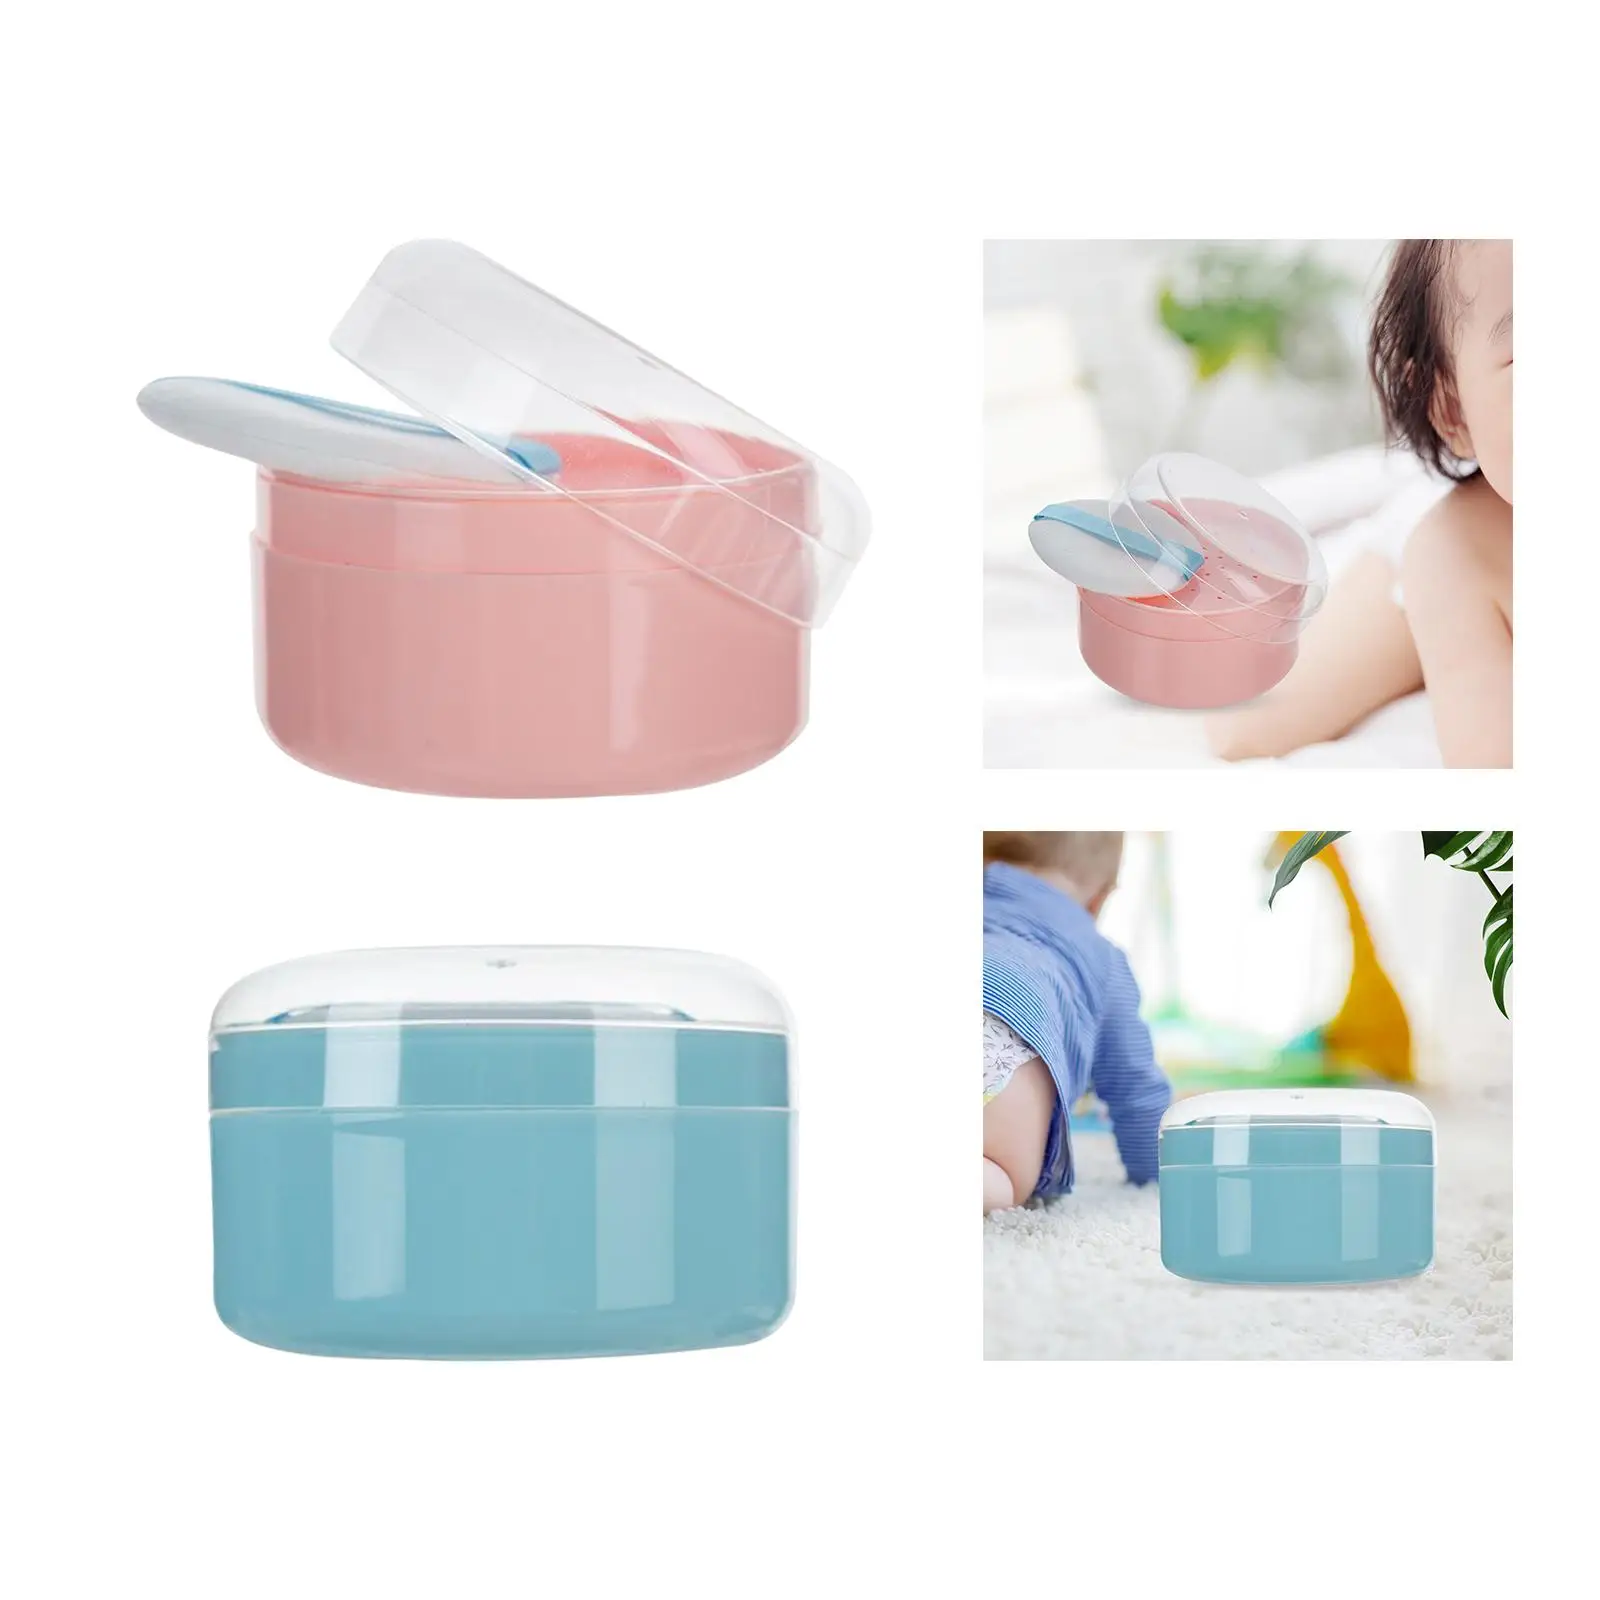 Baby Powder Box, Loose Powder Case, Baby after Bathe Powder Puff Container for Party images - 6